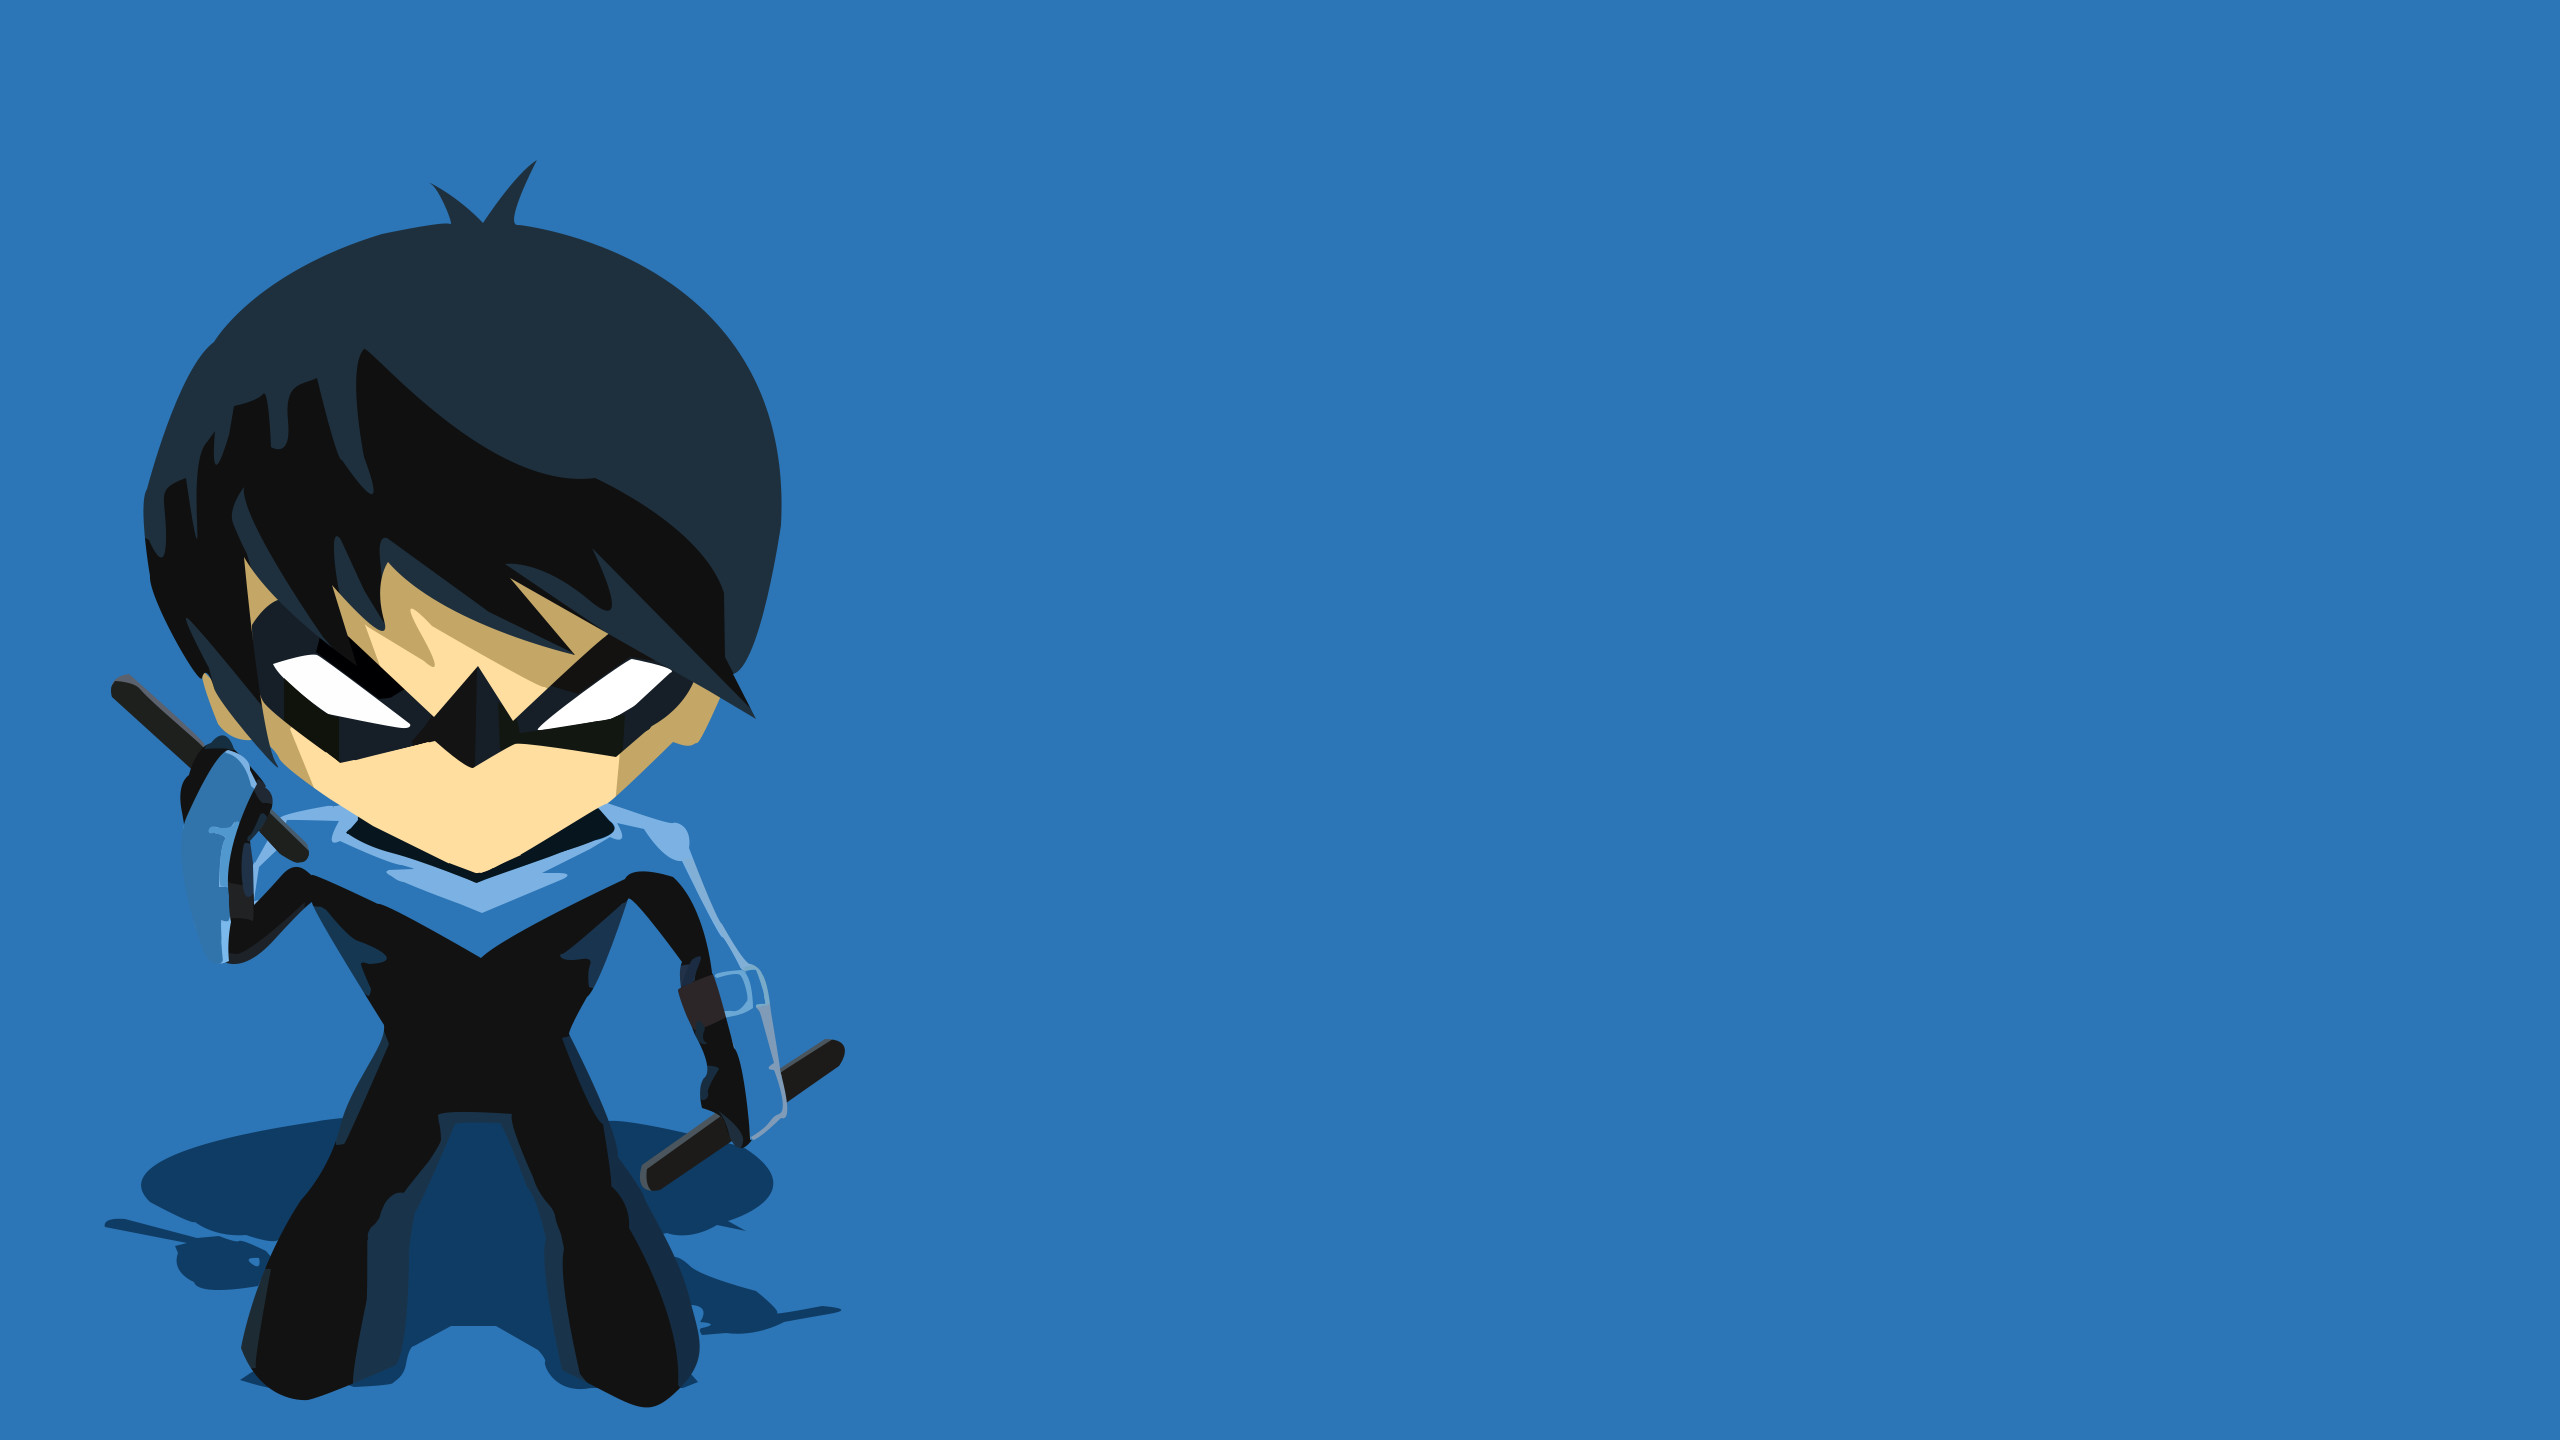 2560x1440 nightwing Finished Awesome png by RizZeArtZ nightwing Finished Awesome png  by RizZeArtZ